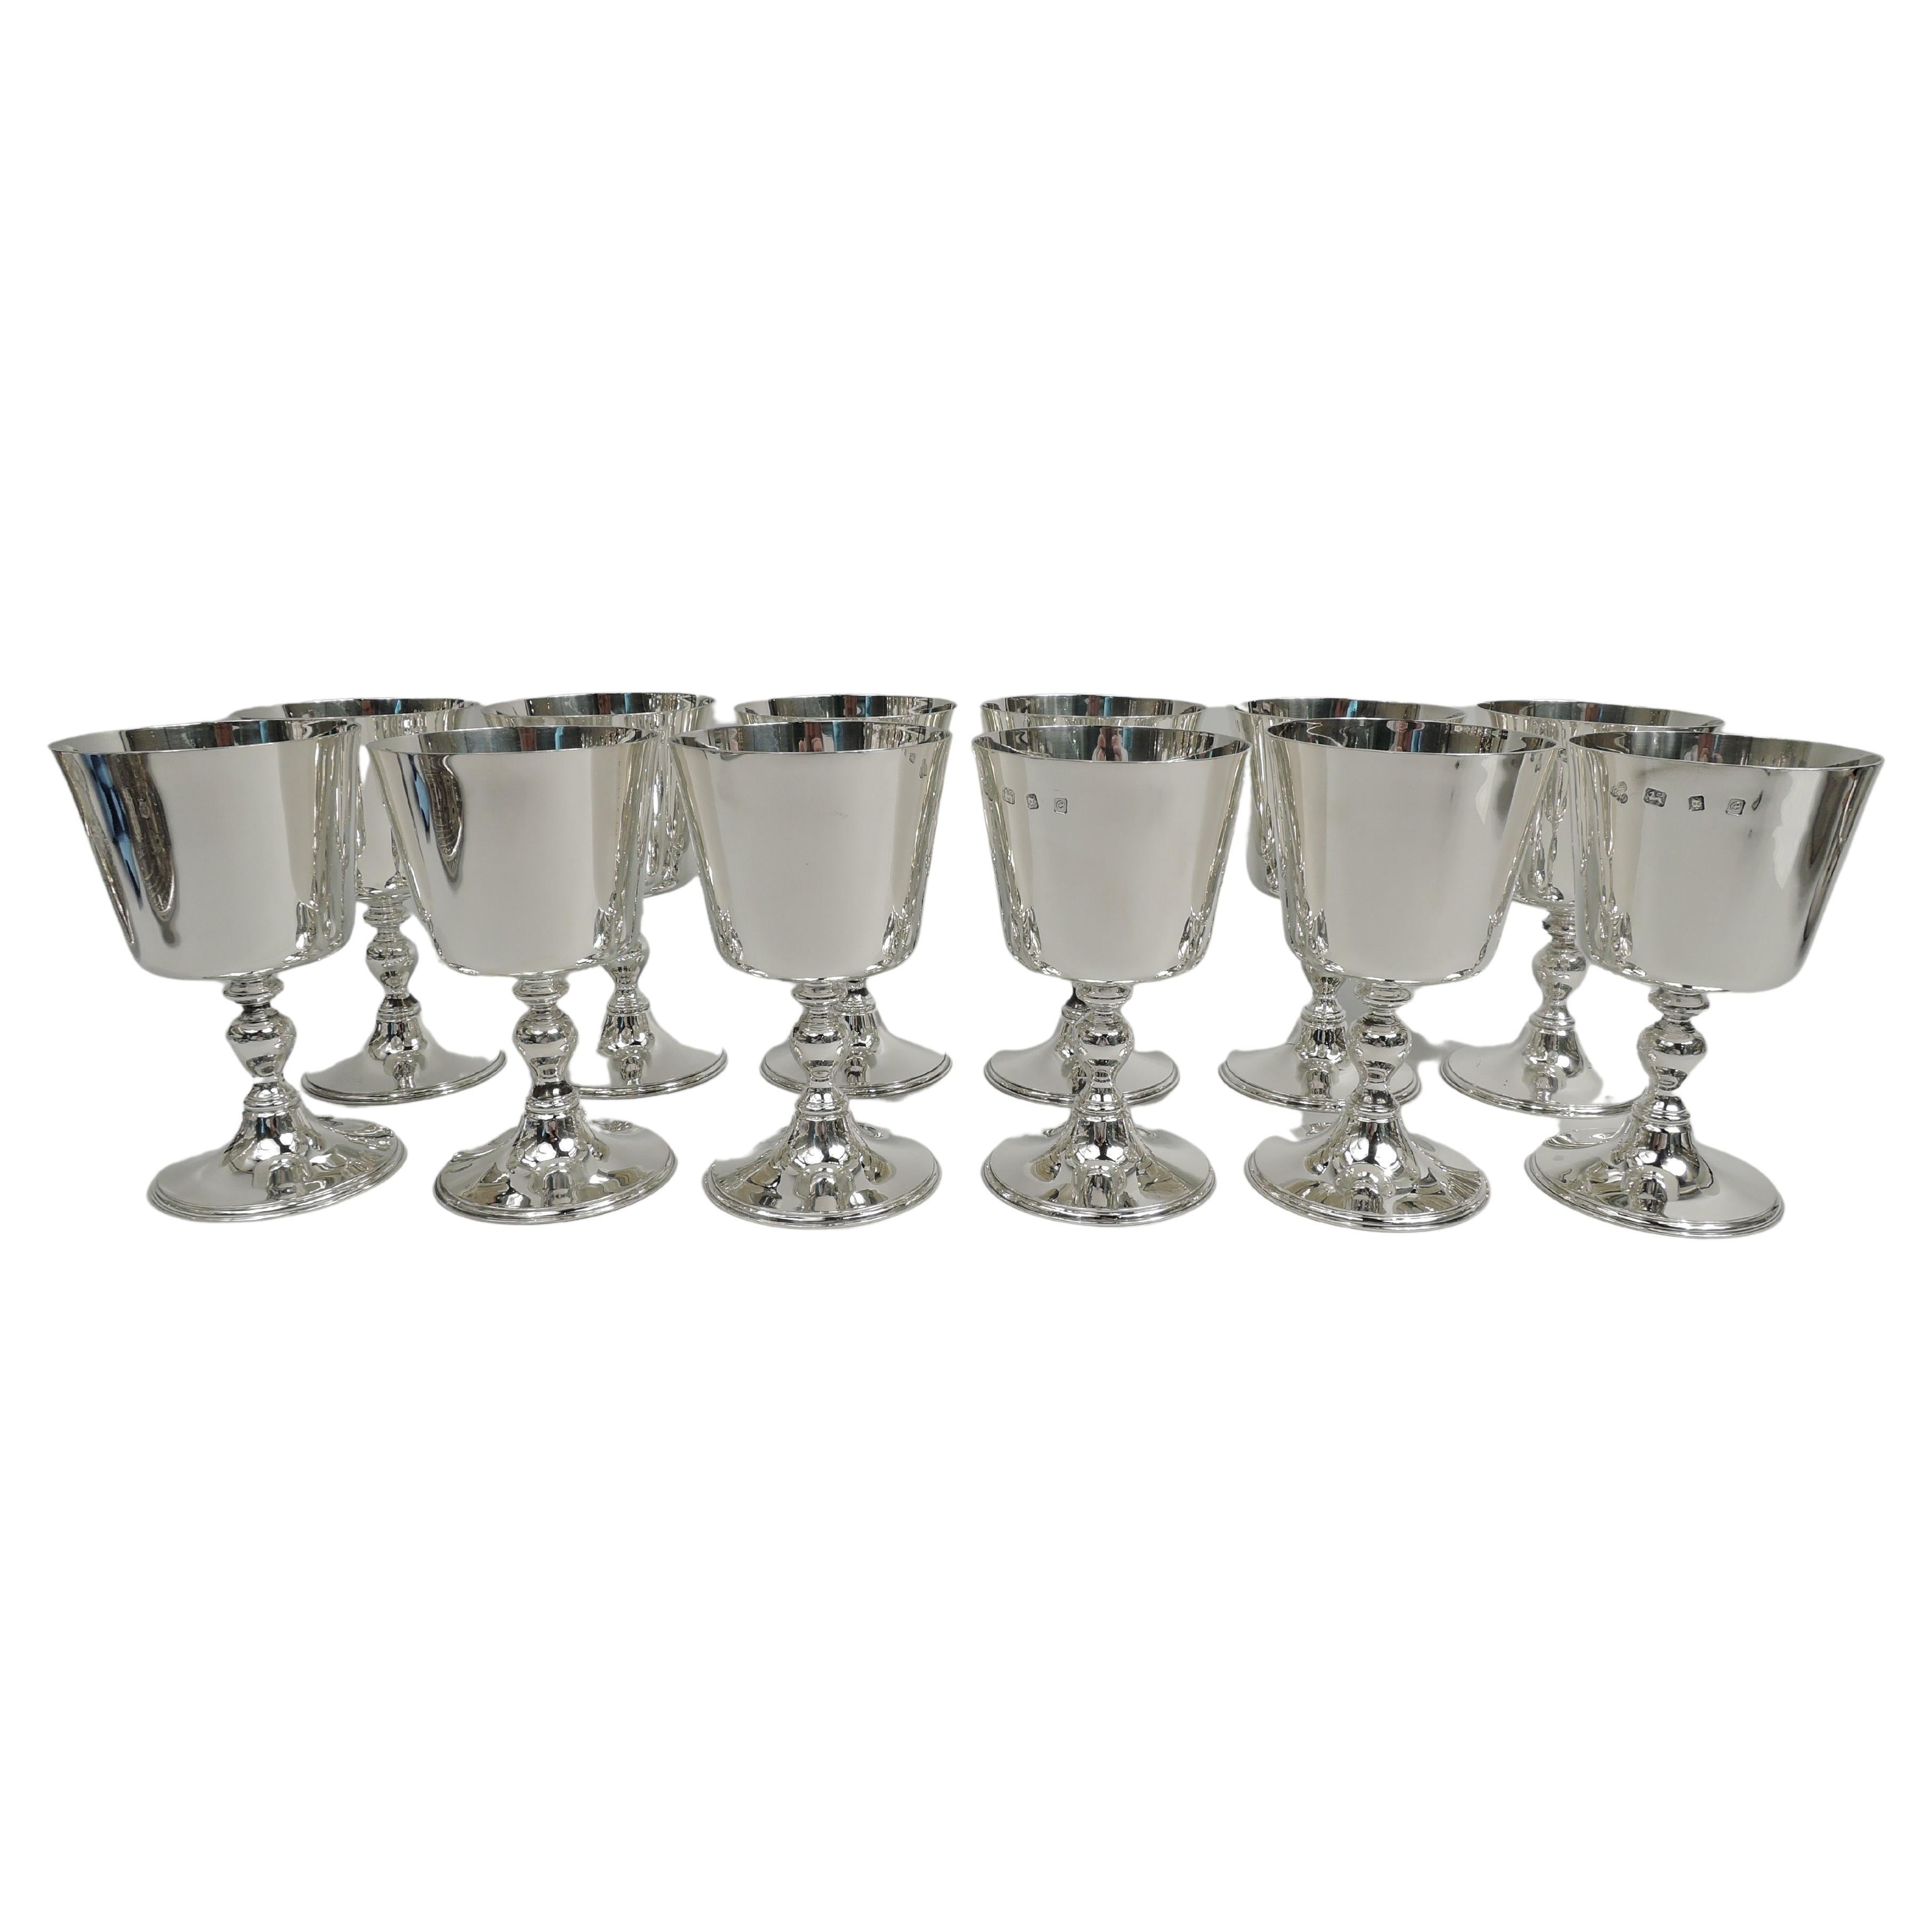 Set of 12 Traditional English Sterling Silver Goblets